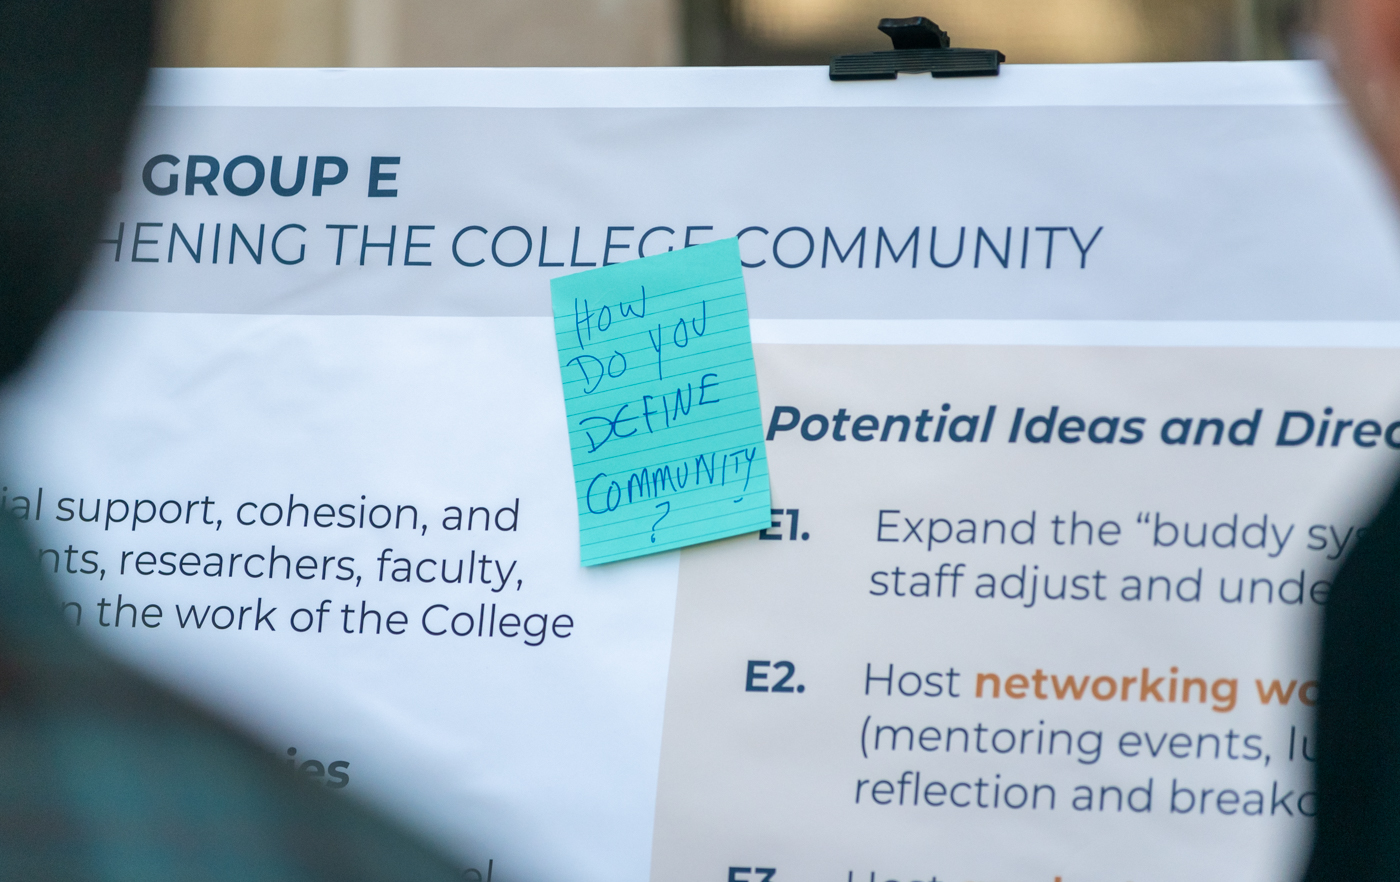 A sticky note attached to a planning board asks attendees how they define community.